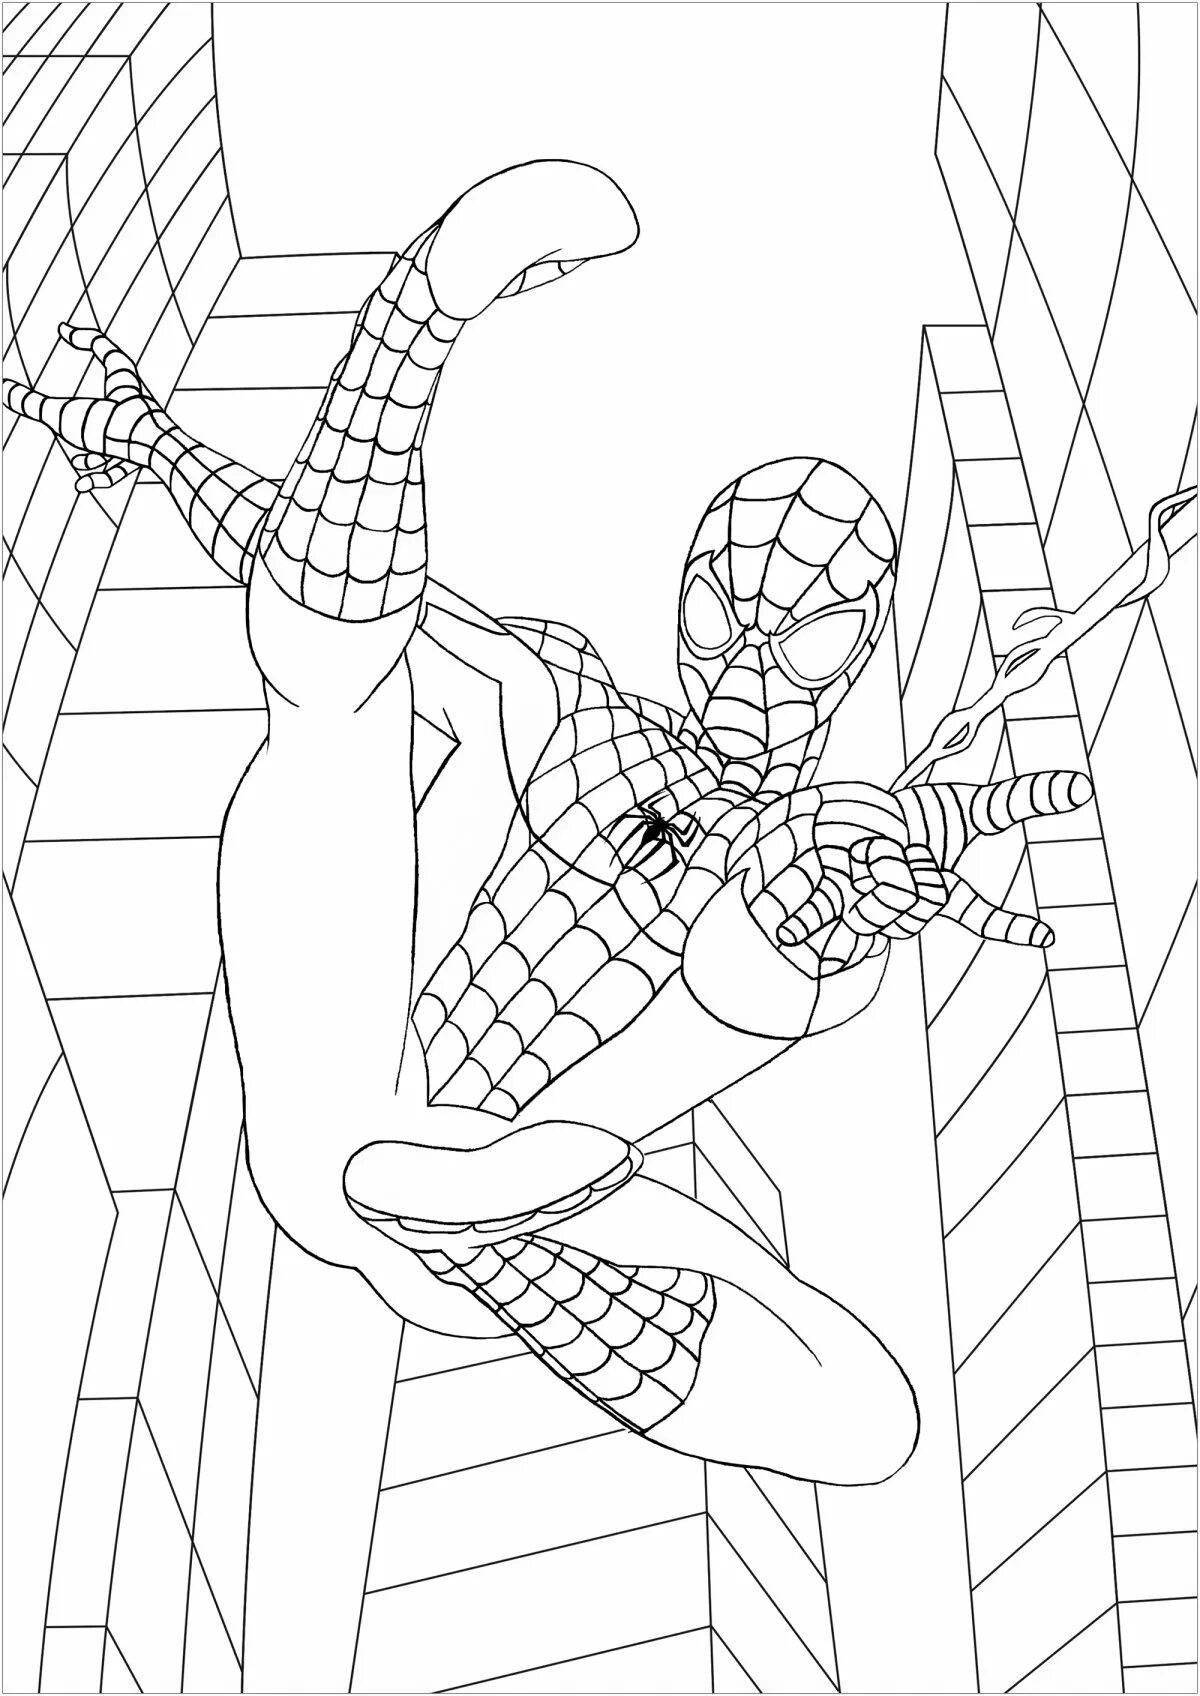 Charming coloring spiderman peter parker